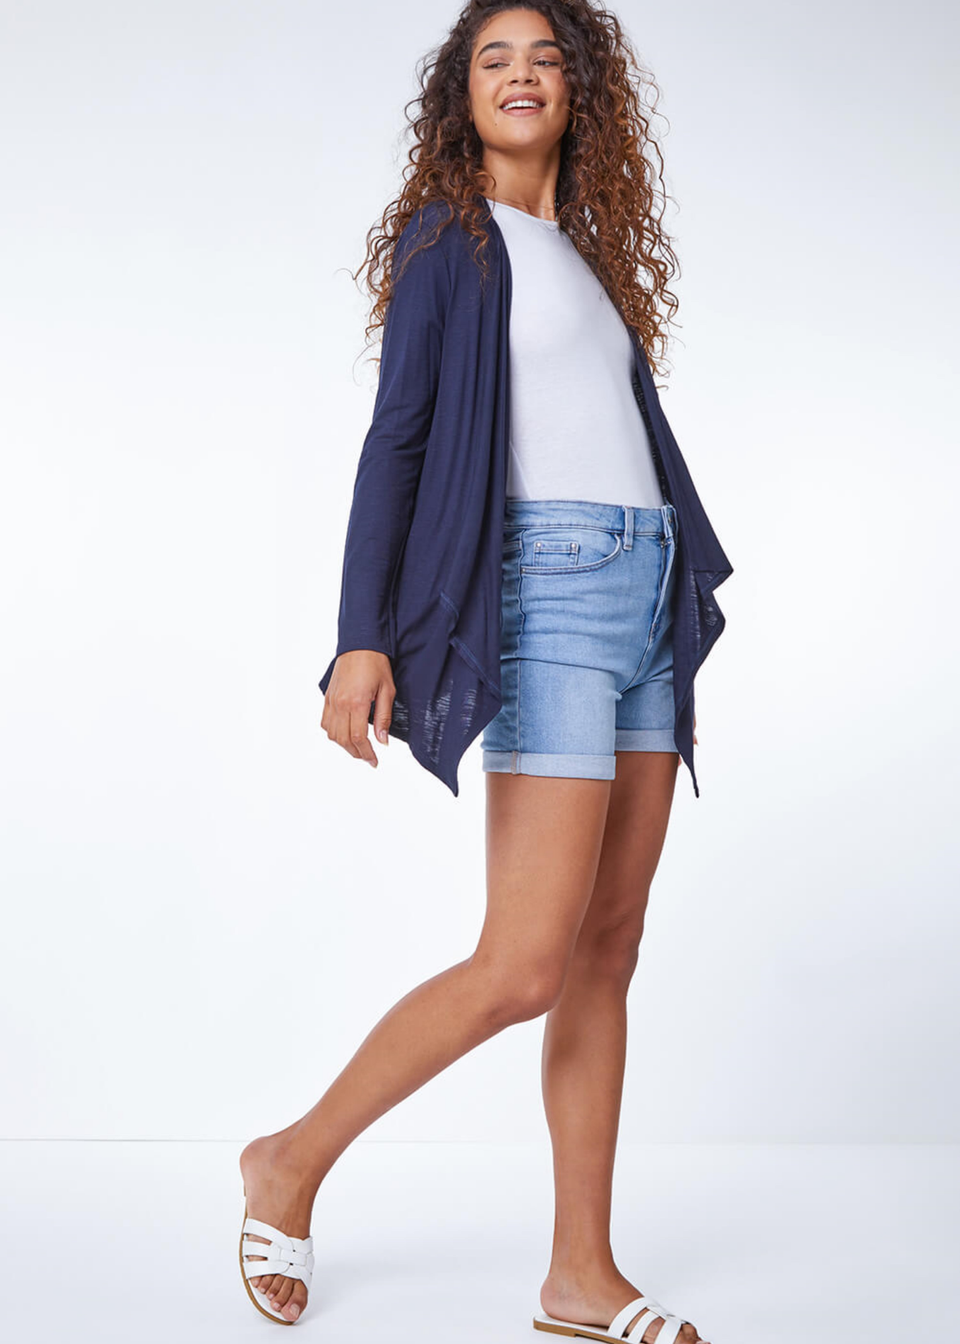 Navy Waterfall Front Jersey Cardigan